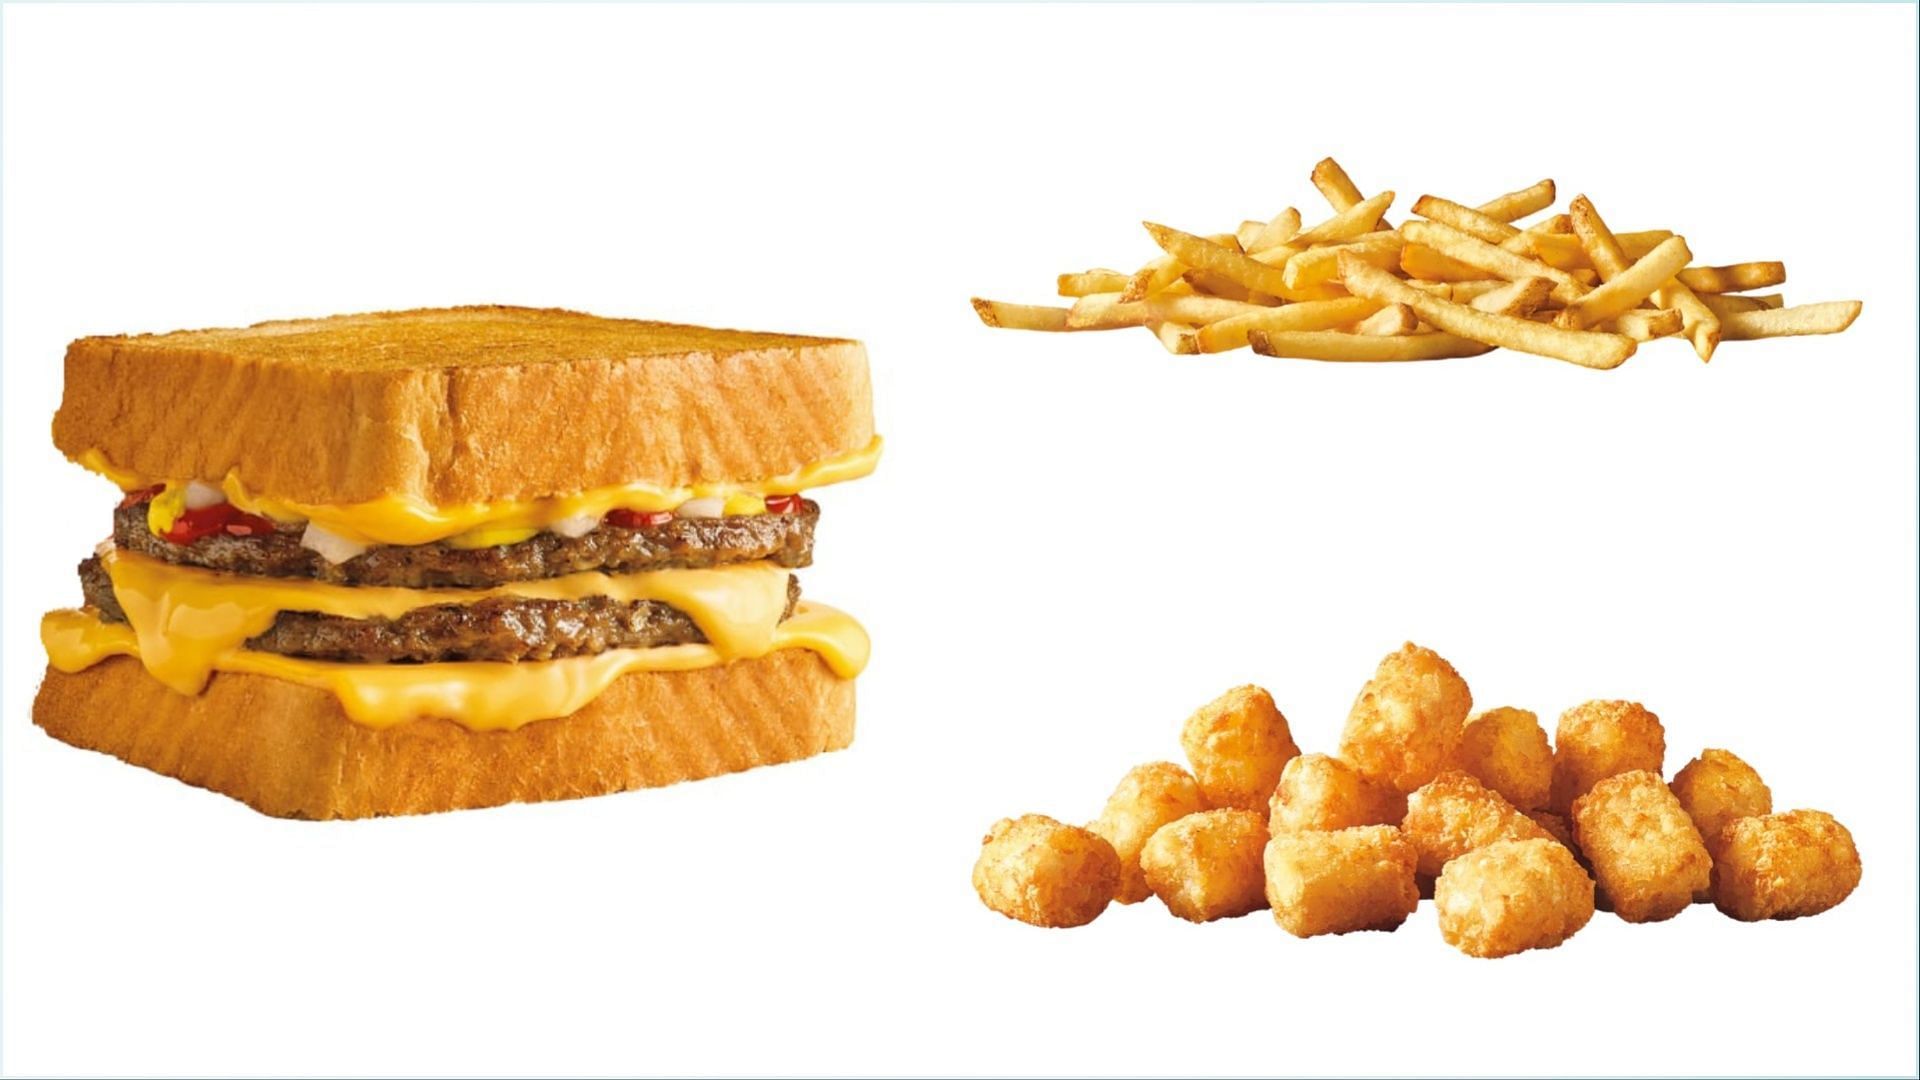 The $3.99 value deal is available at all participating locations (Image via Sonic)